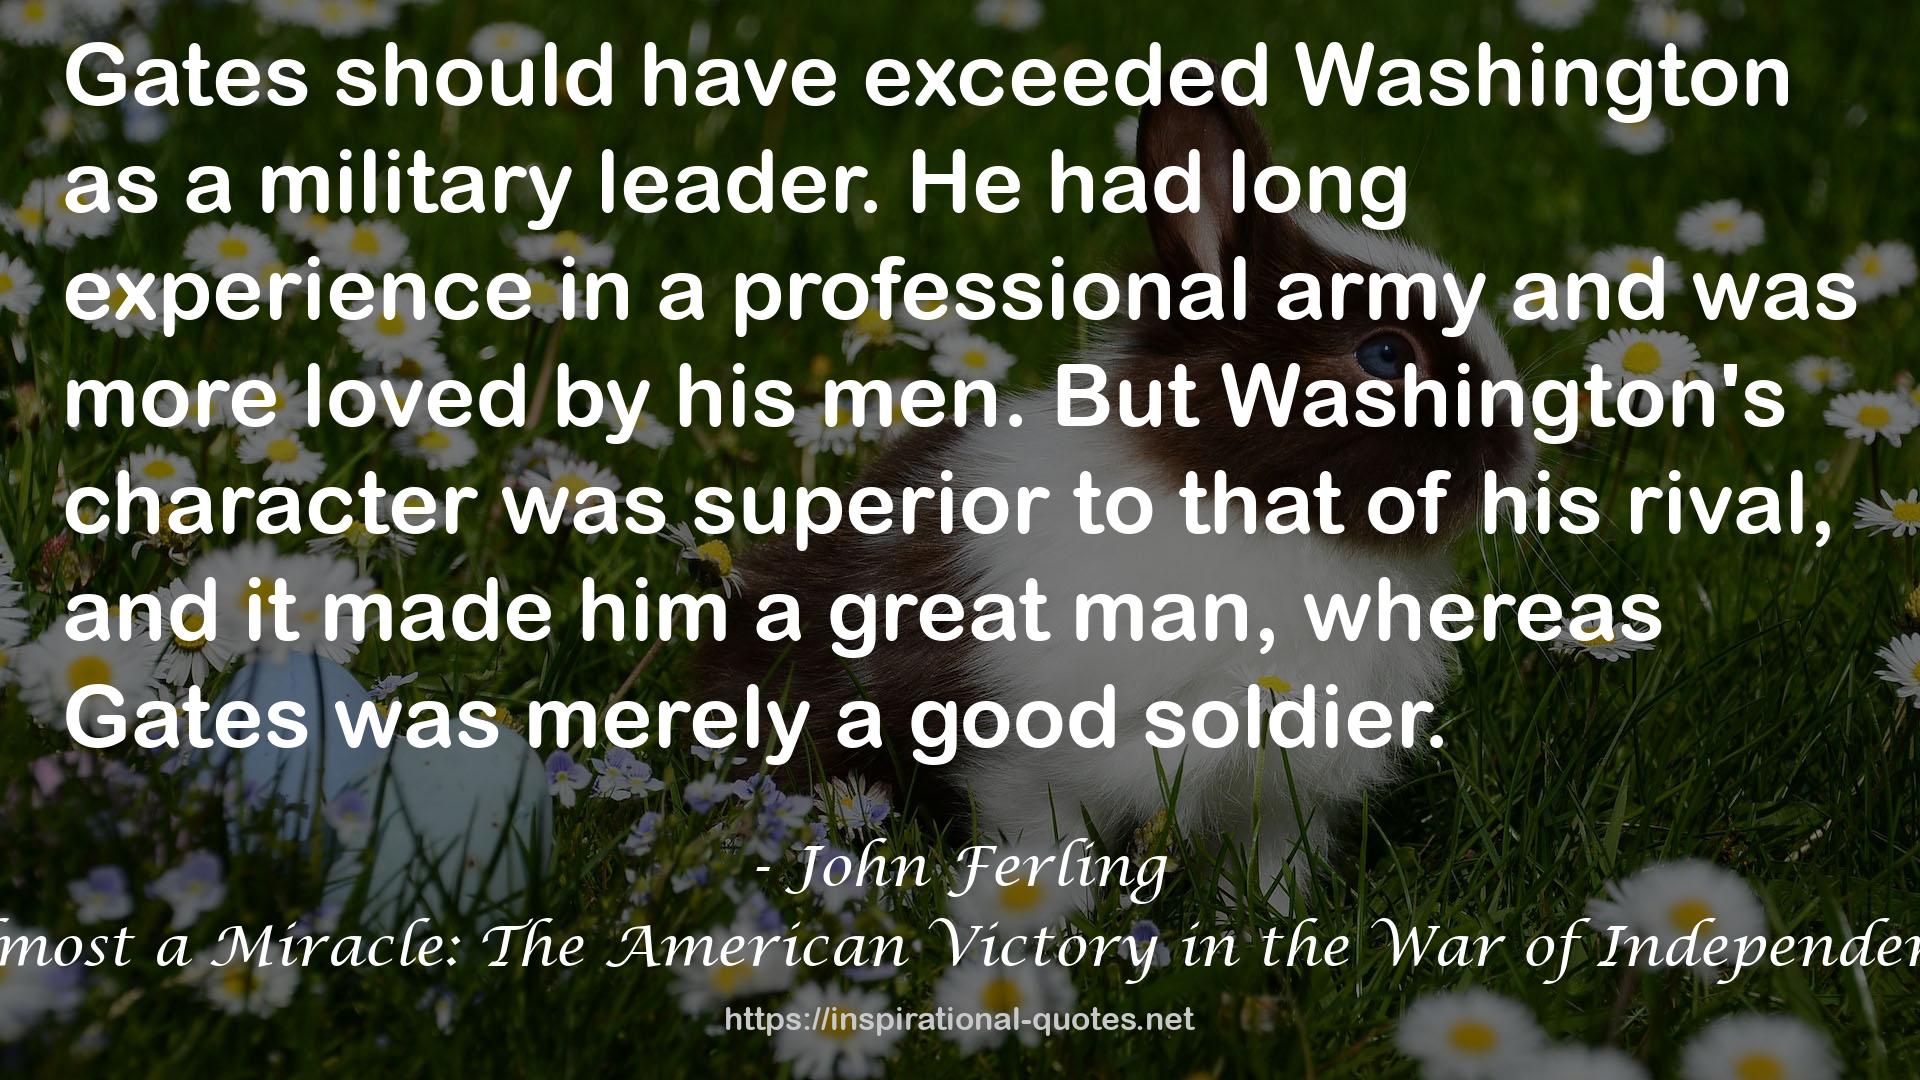 Almost a Miracle: The American Victory in the War of Independence QUOTES